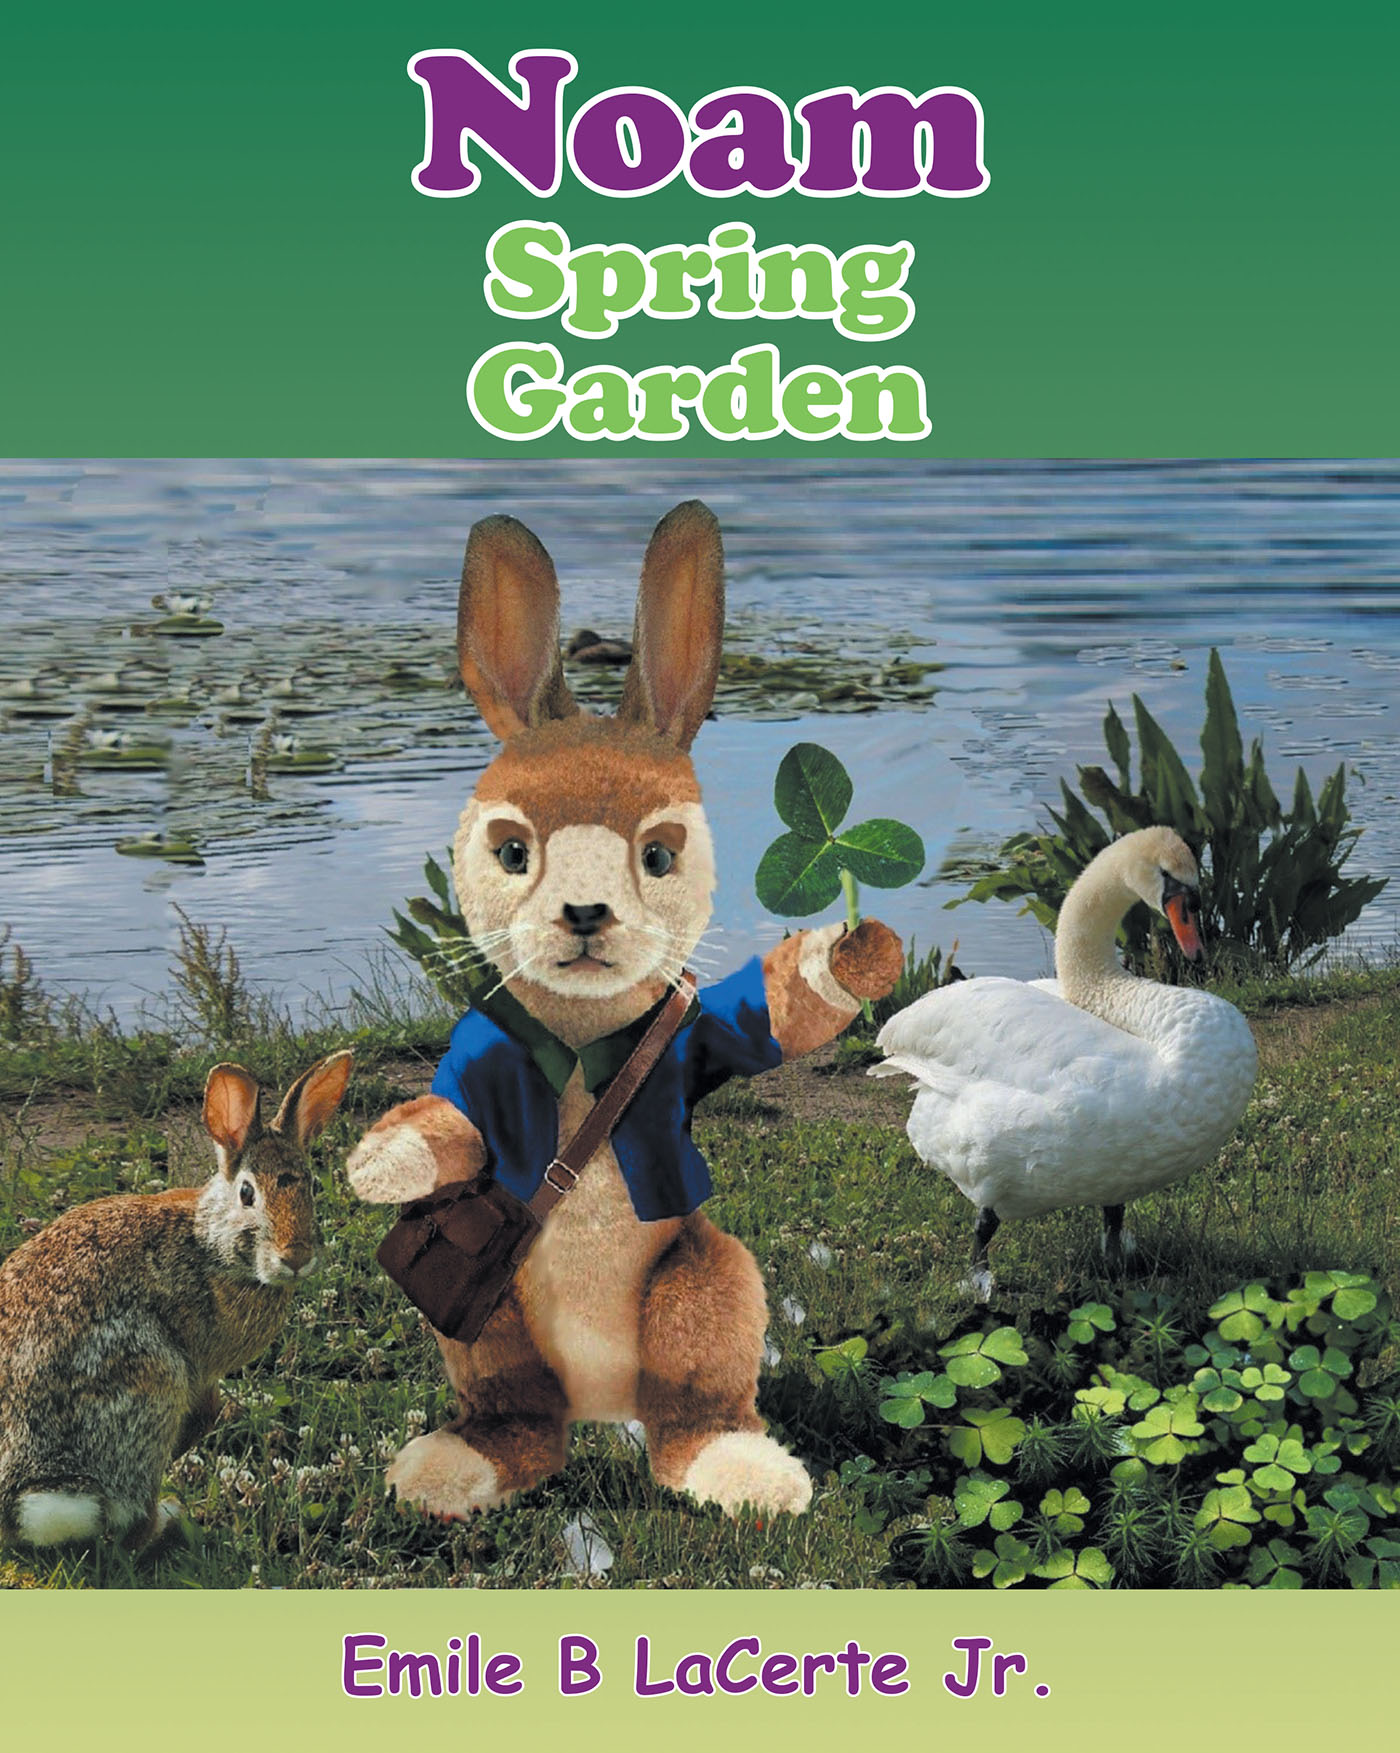 Emile B. LaCerte Jr.’s Newly Released “Noam Spring Garden” is a Fun Installment to the Adventures of the Easter Bunnies and the Forest Friends